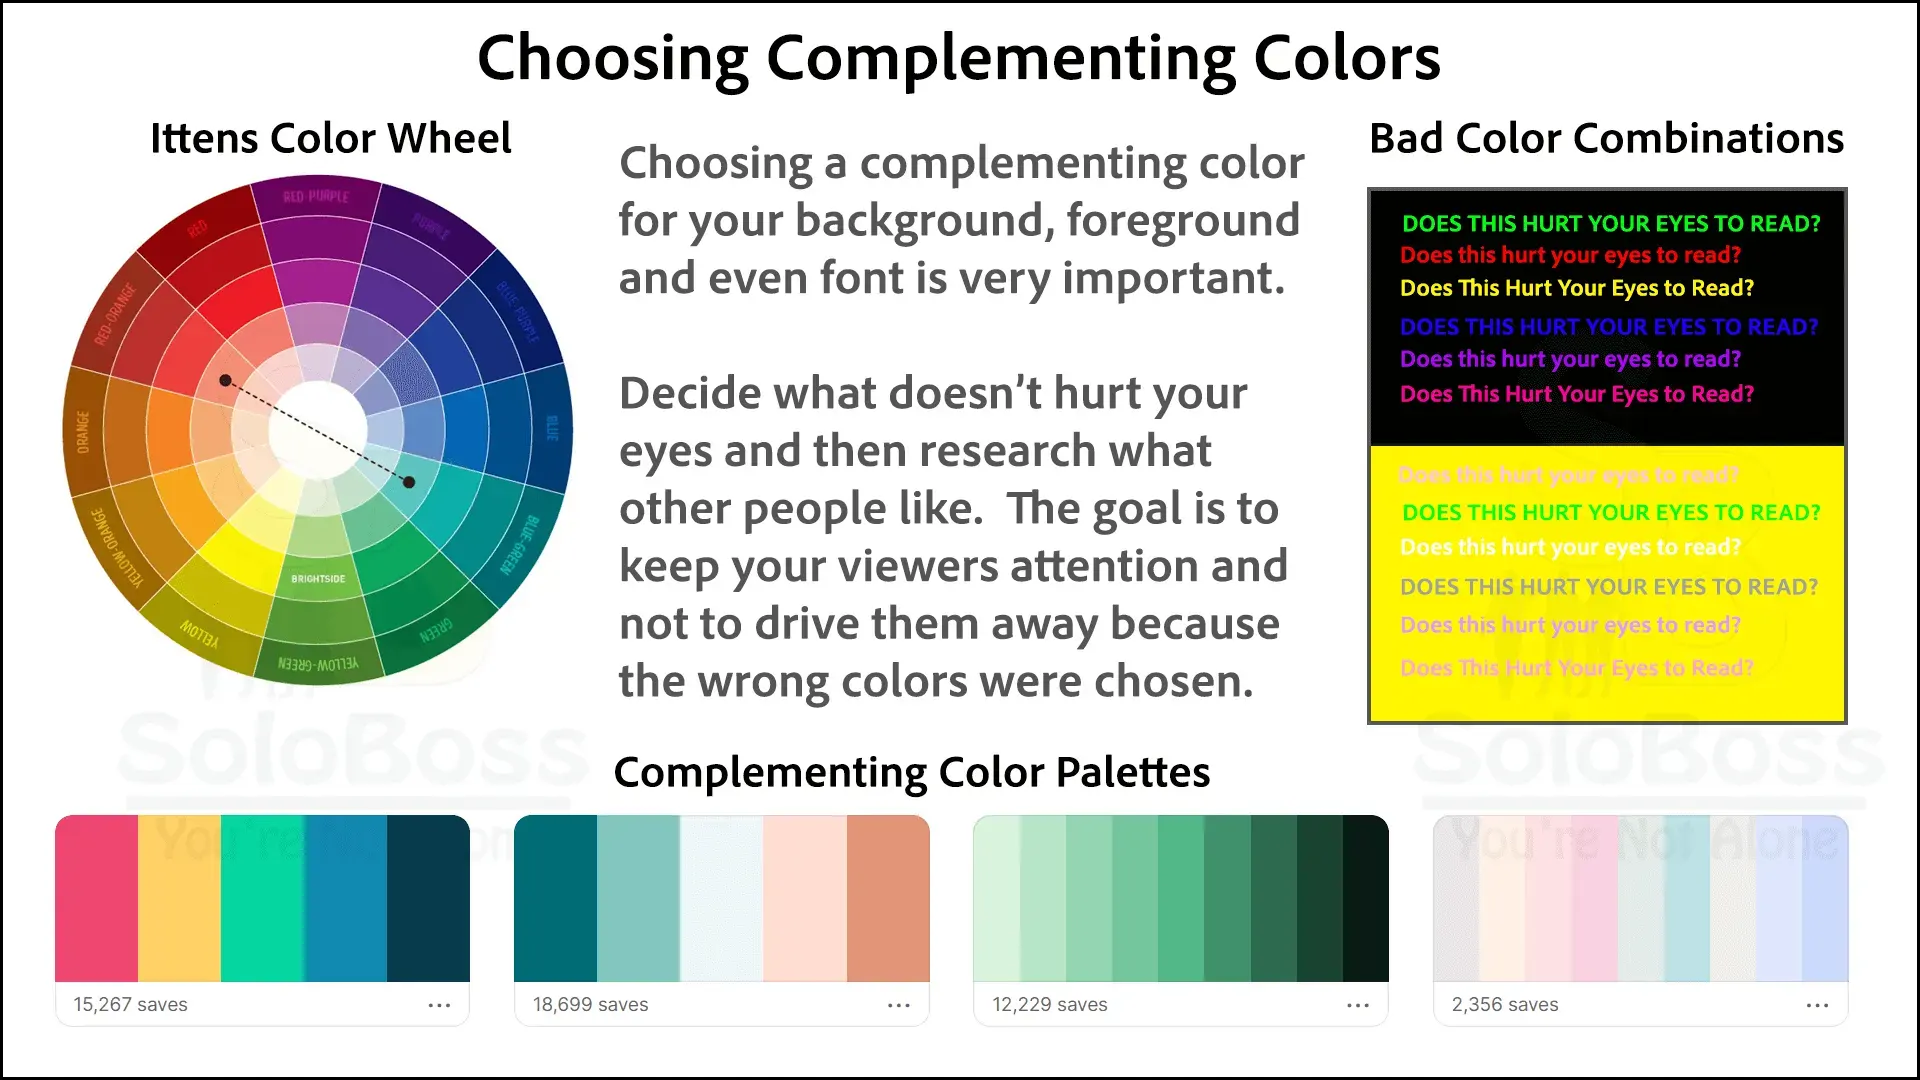 Displays how to choose color combinations for video and graphic design using itten’s color and complementing colors.